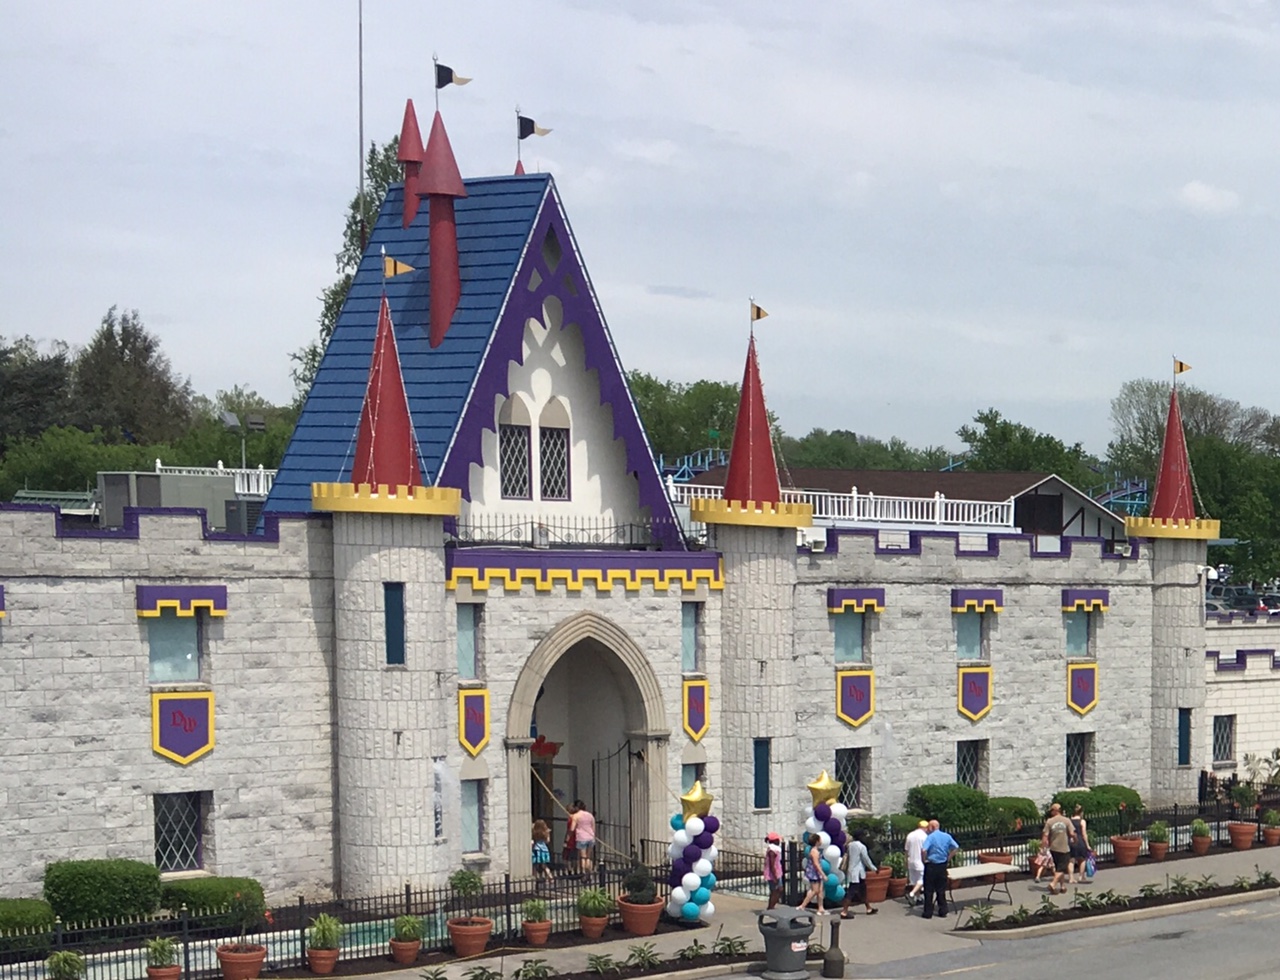 My Top Ten Tips for Dutch Wonderland Been There Done That with Kids